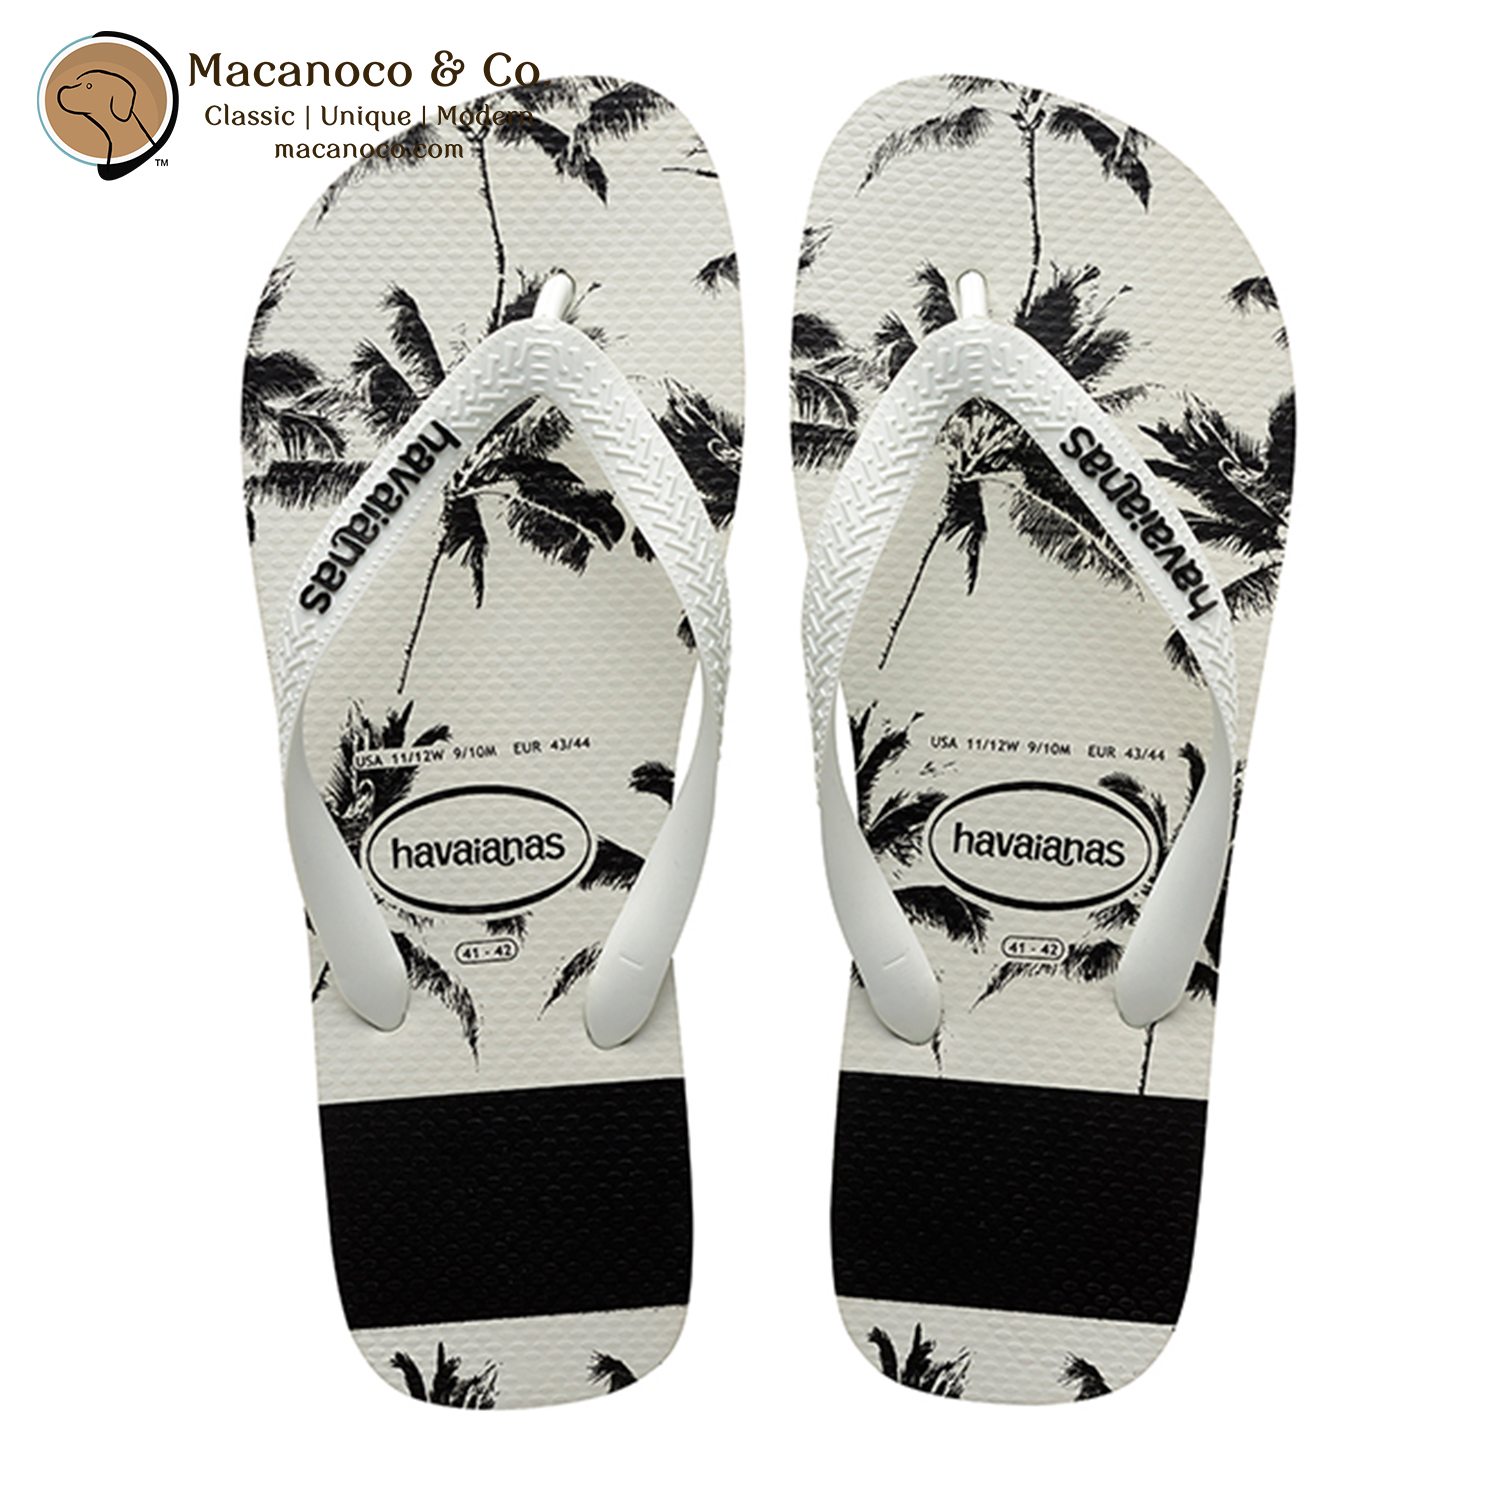 Havaianas Top Stripes Logo Flop Black/White - Macanoco and Co.